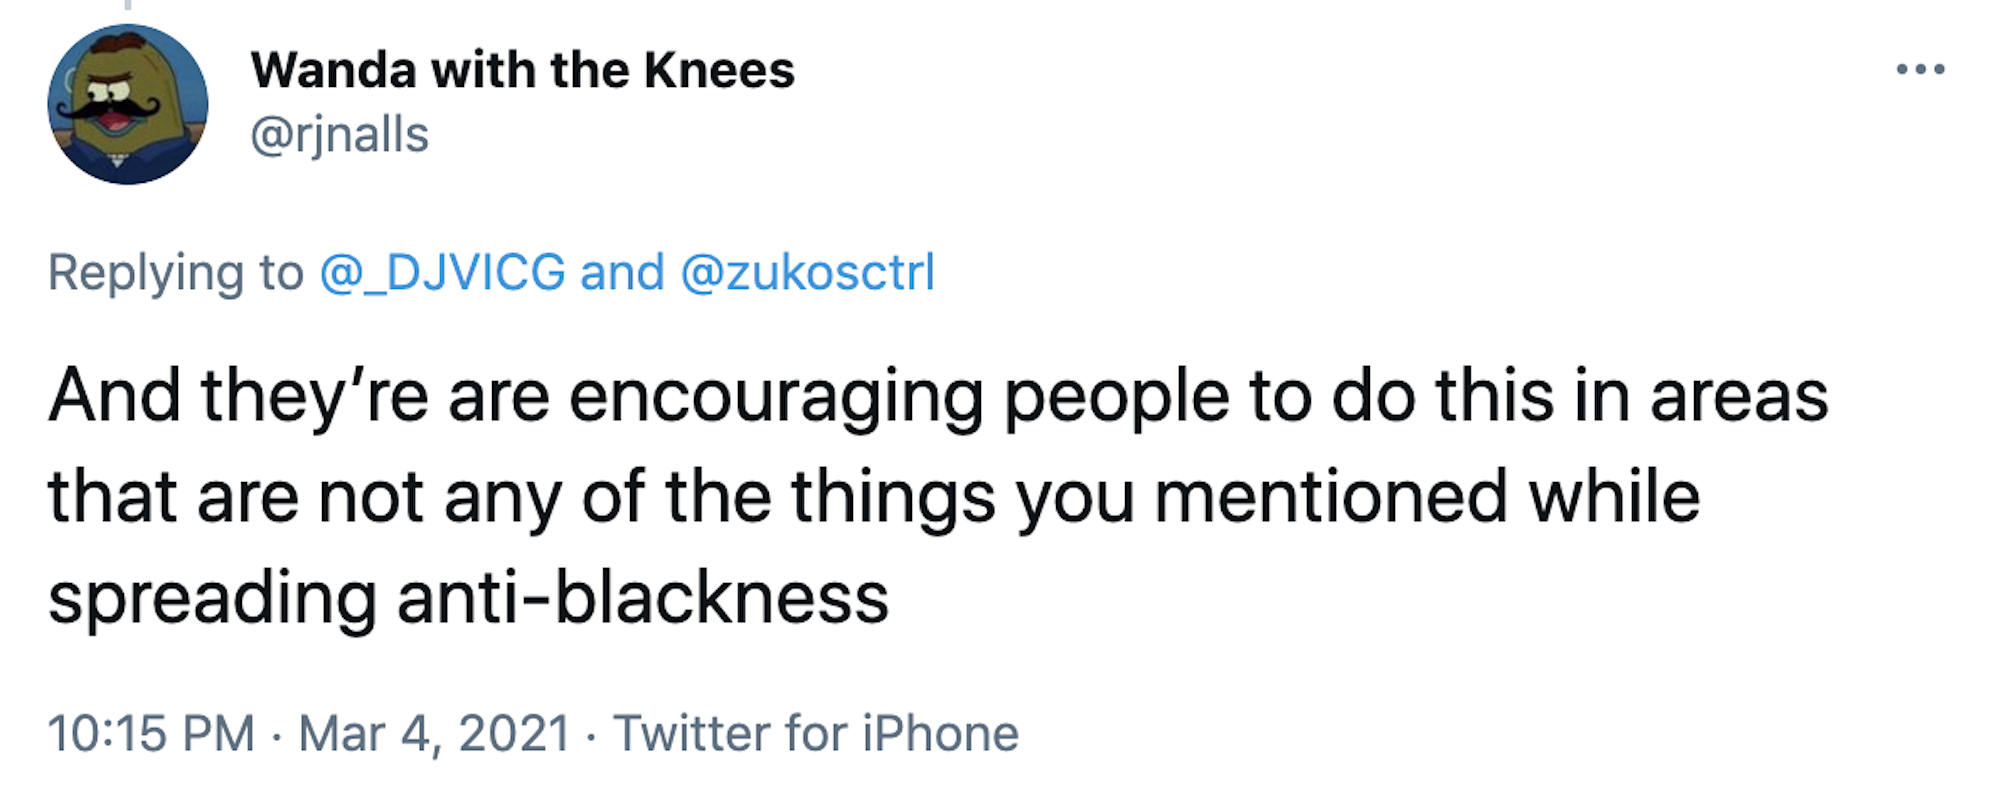 And they’re are encouraging people to do this in areas that are not any of the things you mentioned while spreading anti-blackness